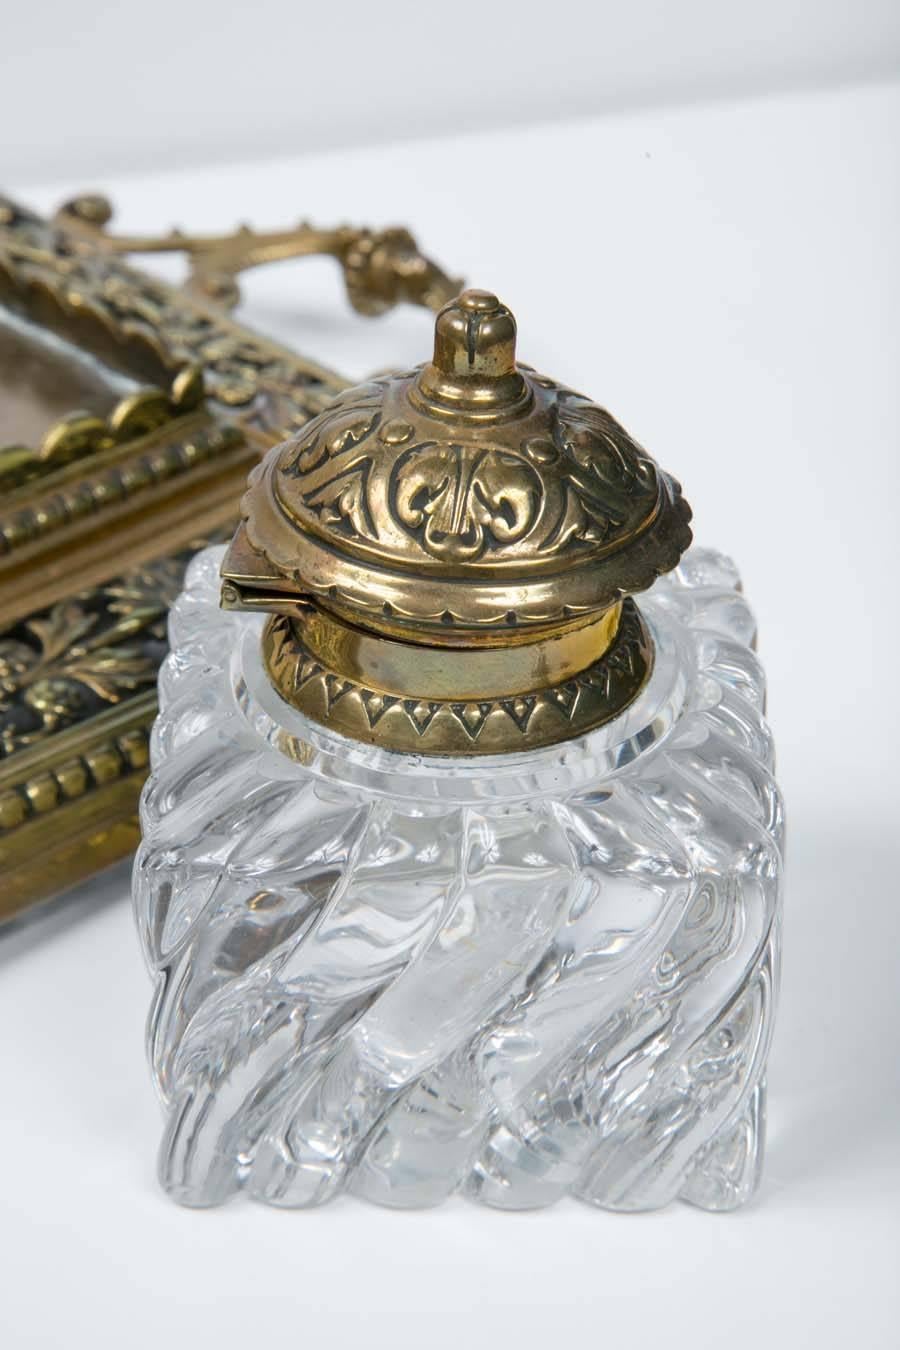 19th Century Crystal Inkwells in Brass Tray with Sturgeon Stamp Holder 2